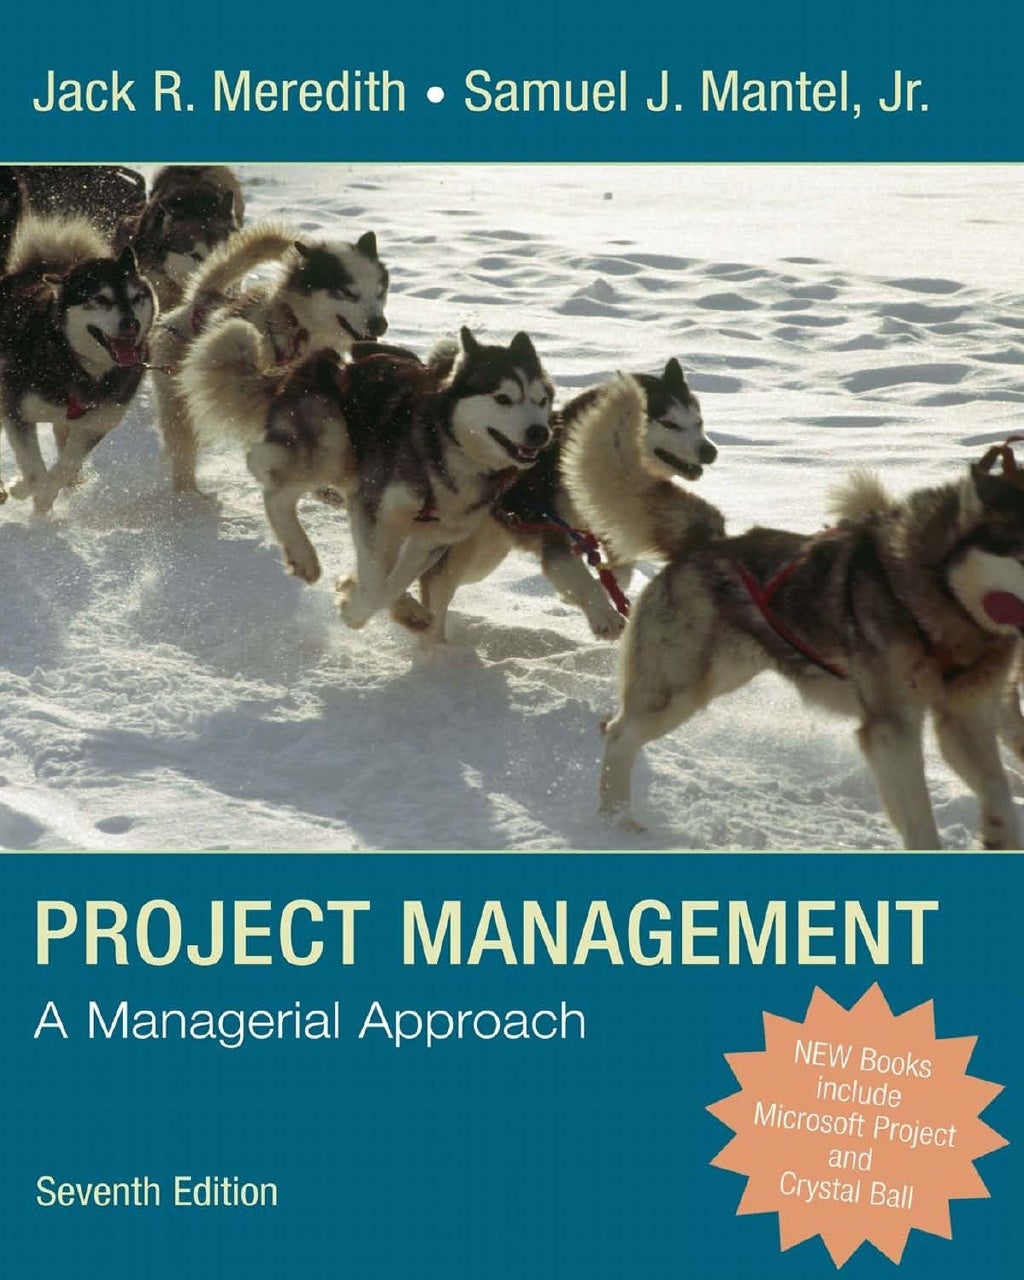 Project Management A Managerial Approach 8th Edition Pdf Free Download